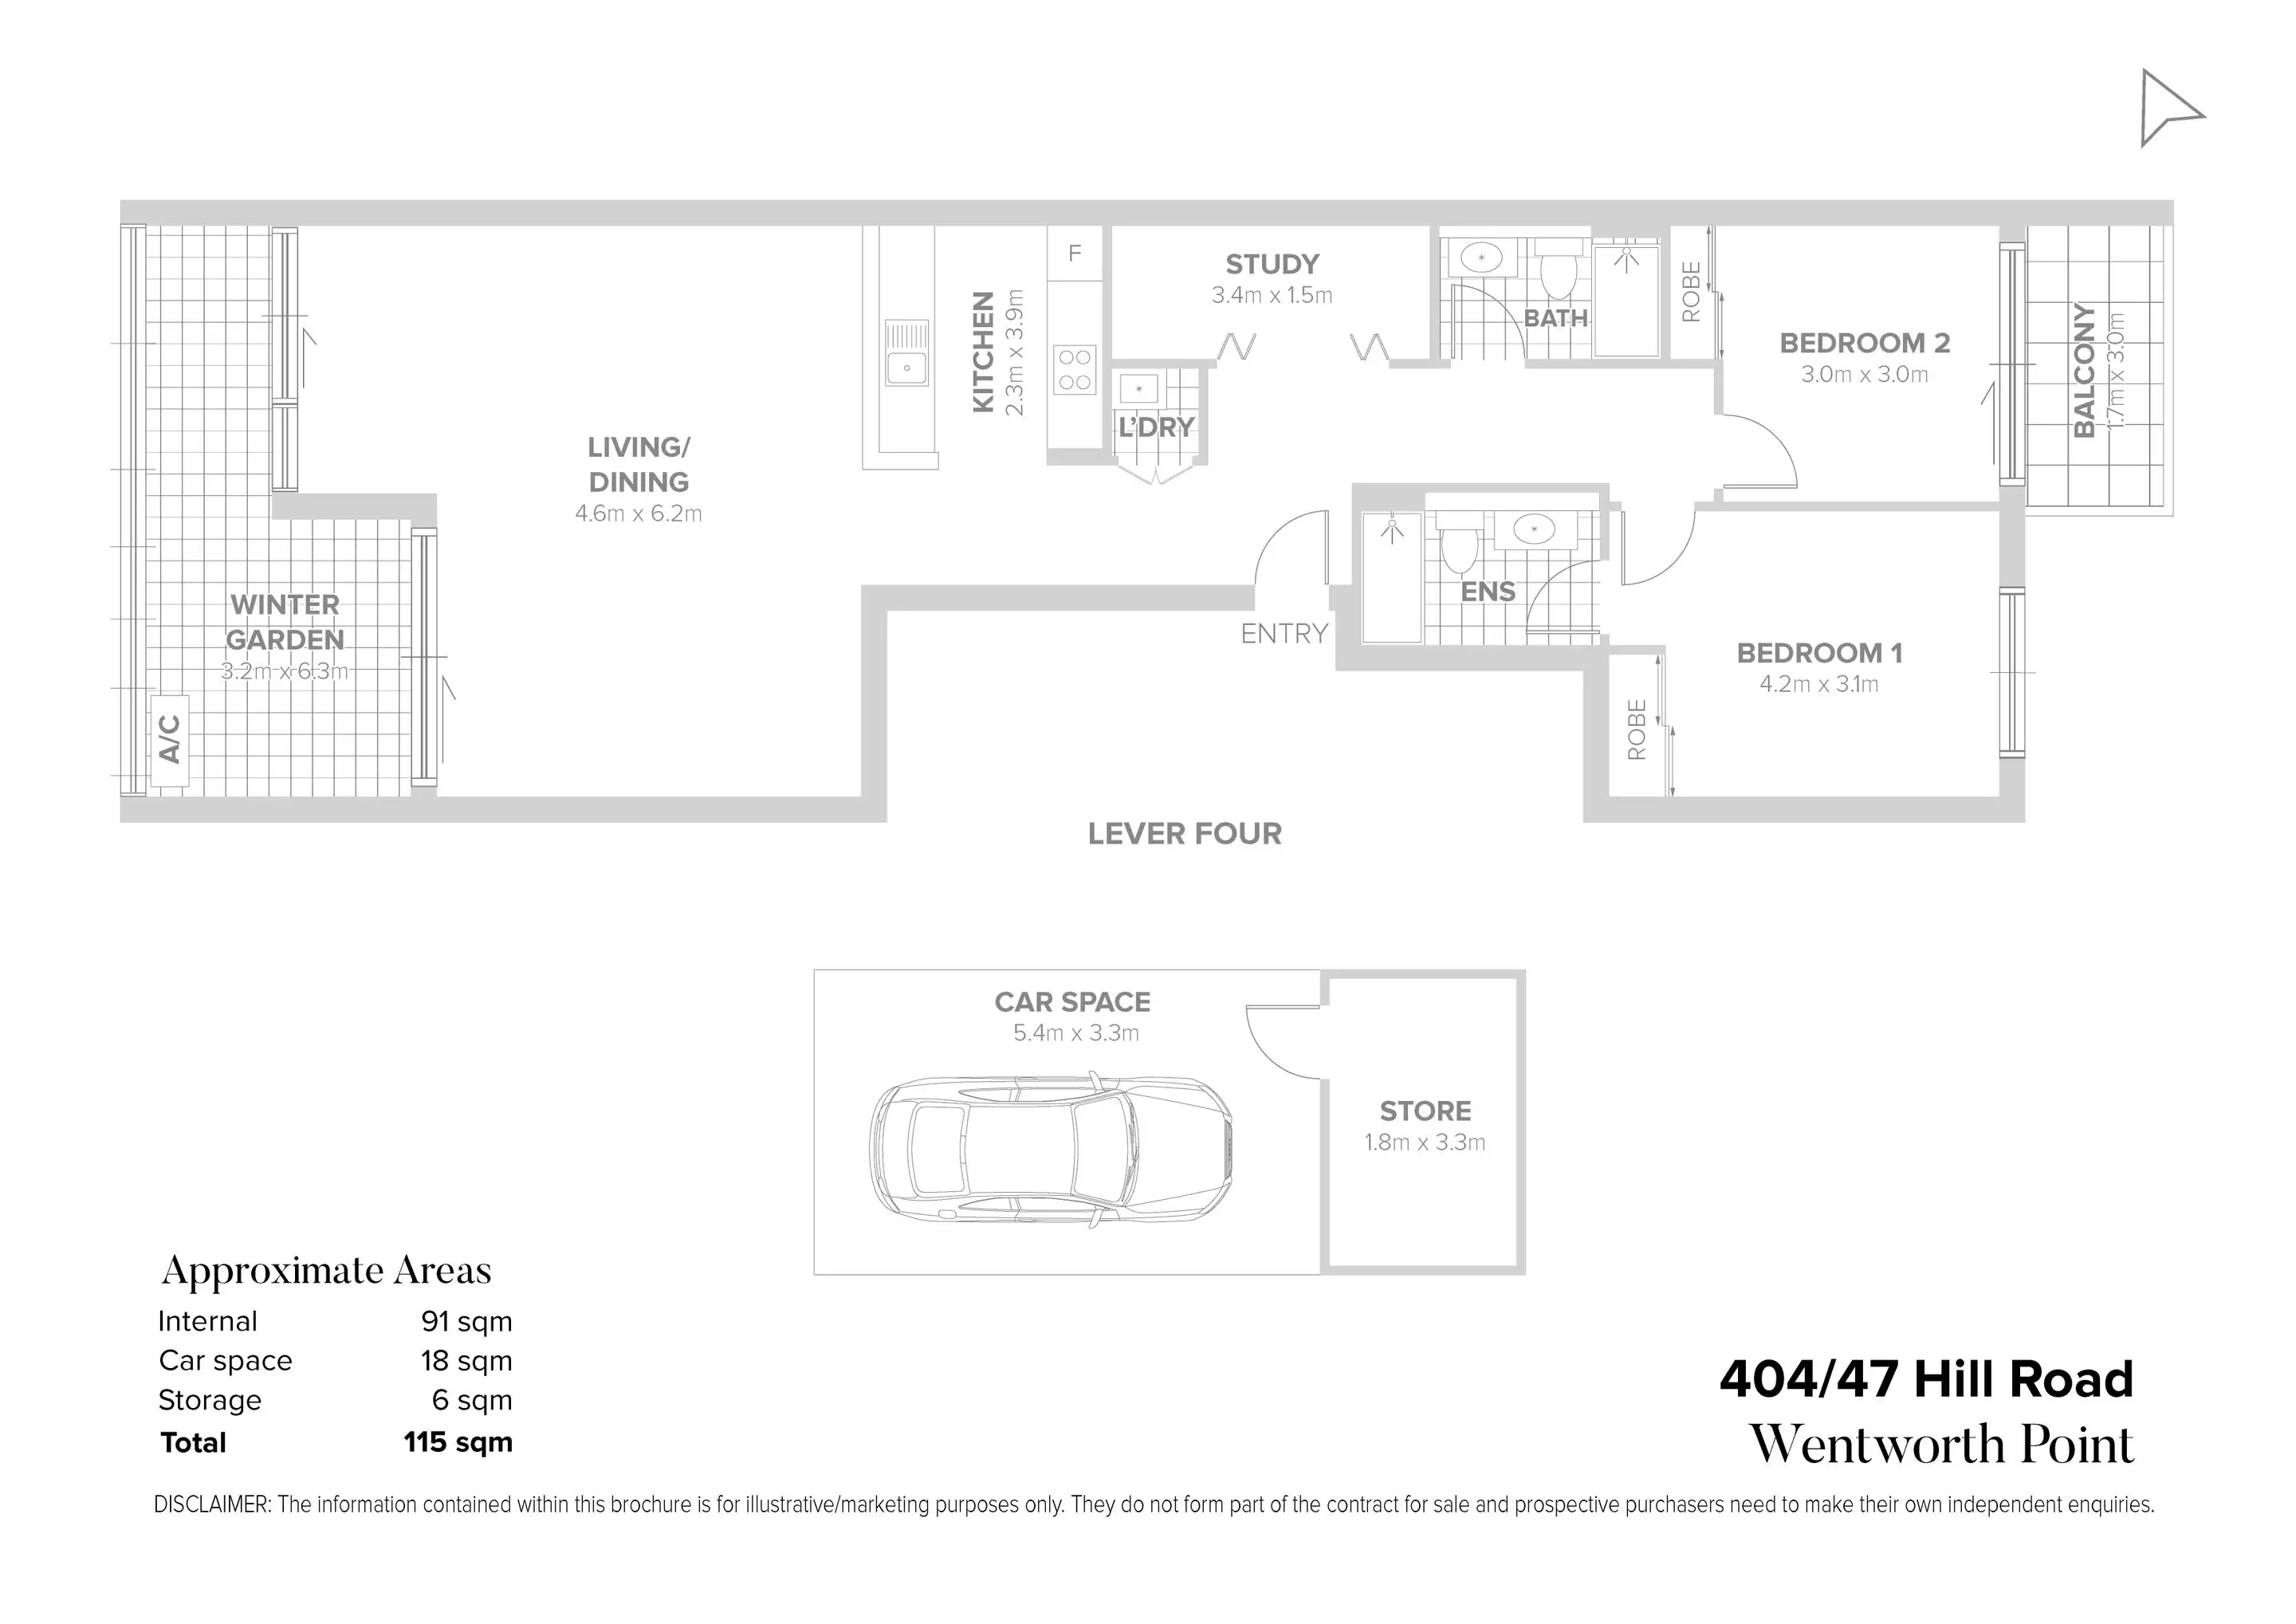 404/47 Hill Road, Wentworth Point Sold by Chidiac Realty - floorplan